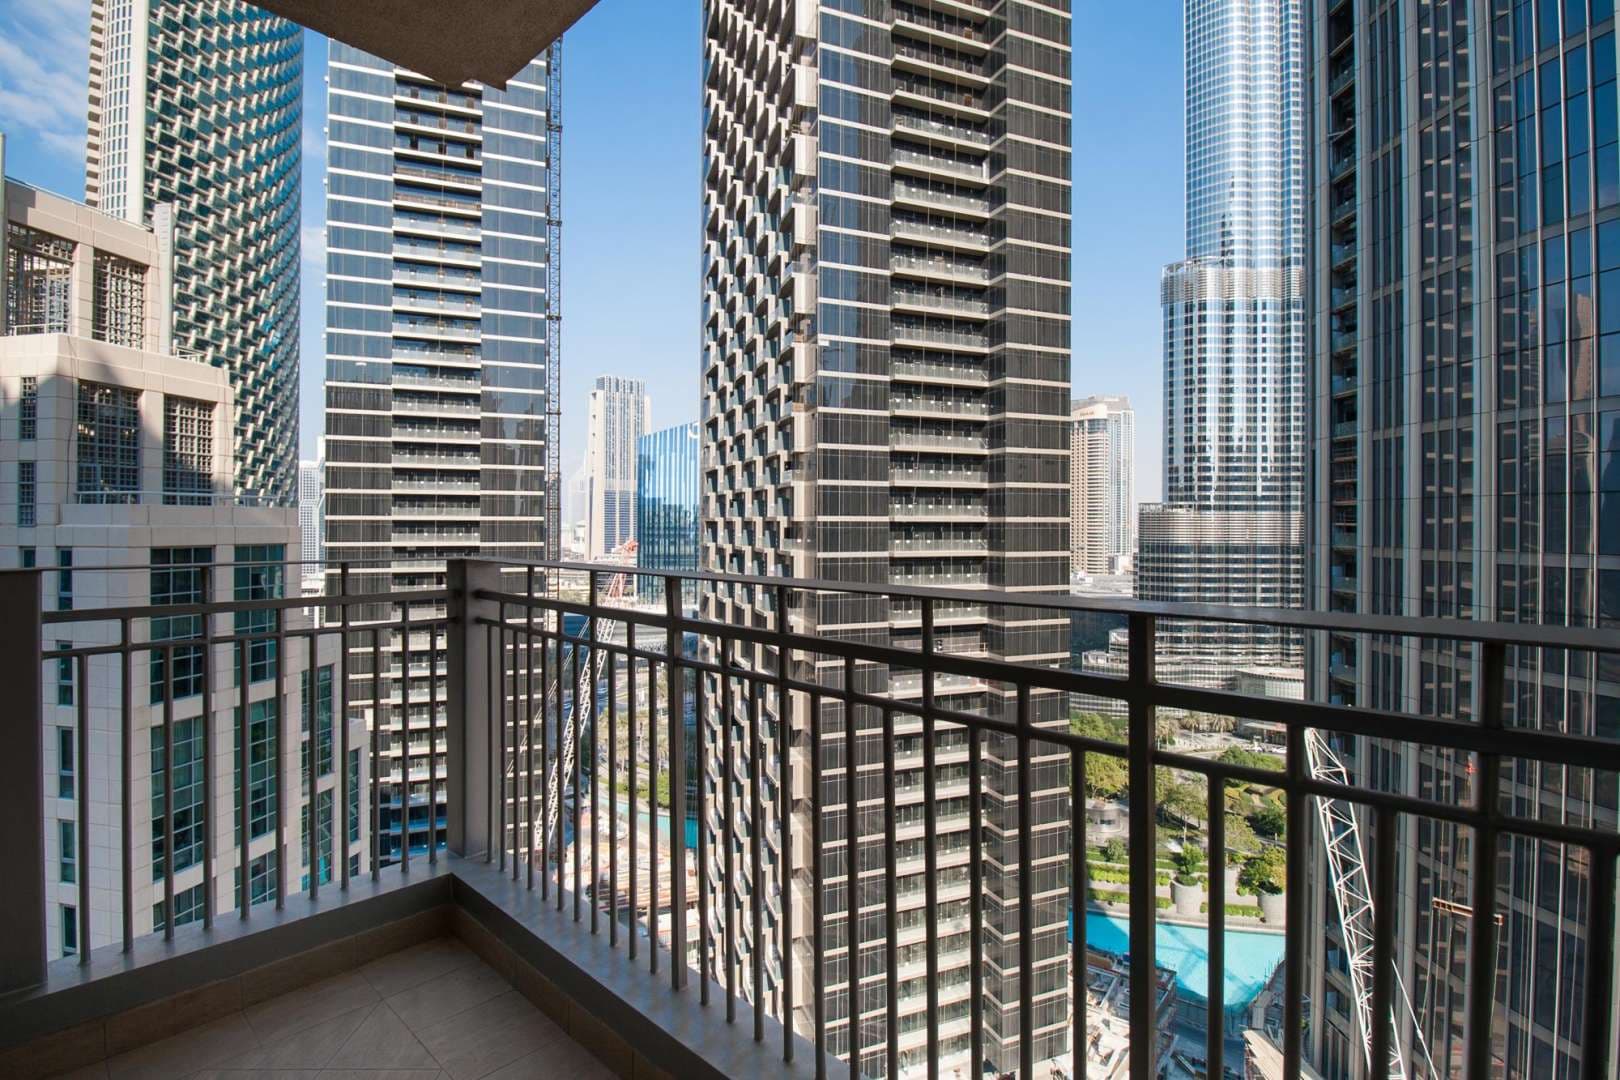 2 Bedroom Apartment For Sale Standpoint Tower A Lp05394 2b047130160c1200.jpg